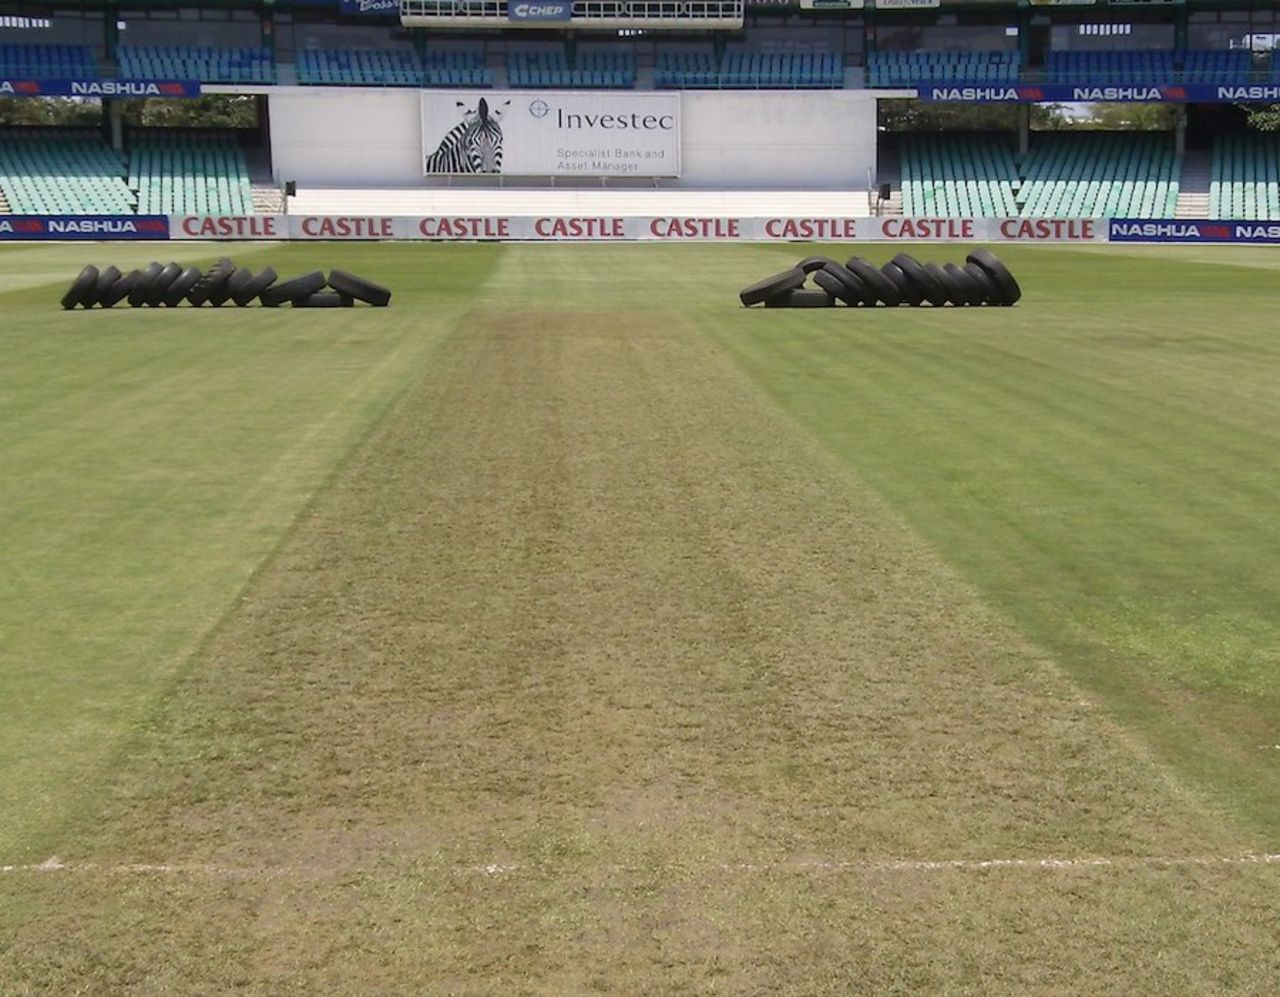 The pitch at Kingsmead for the Boxing Day Test between South Africa and India, Durban, December 22, 2010